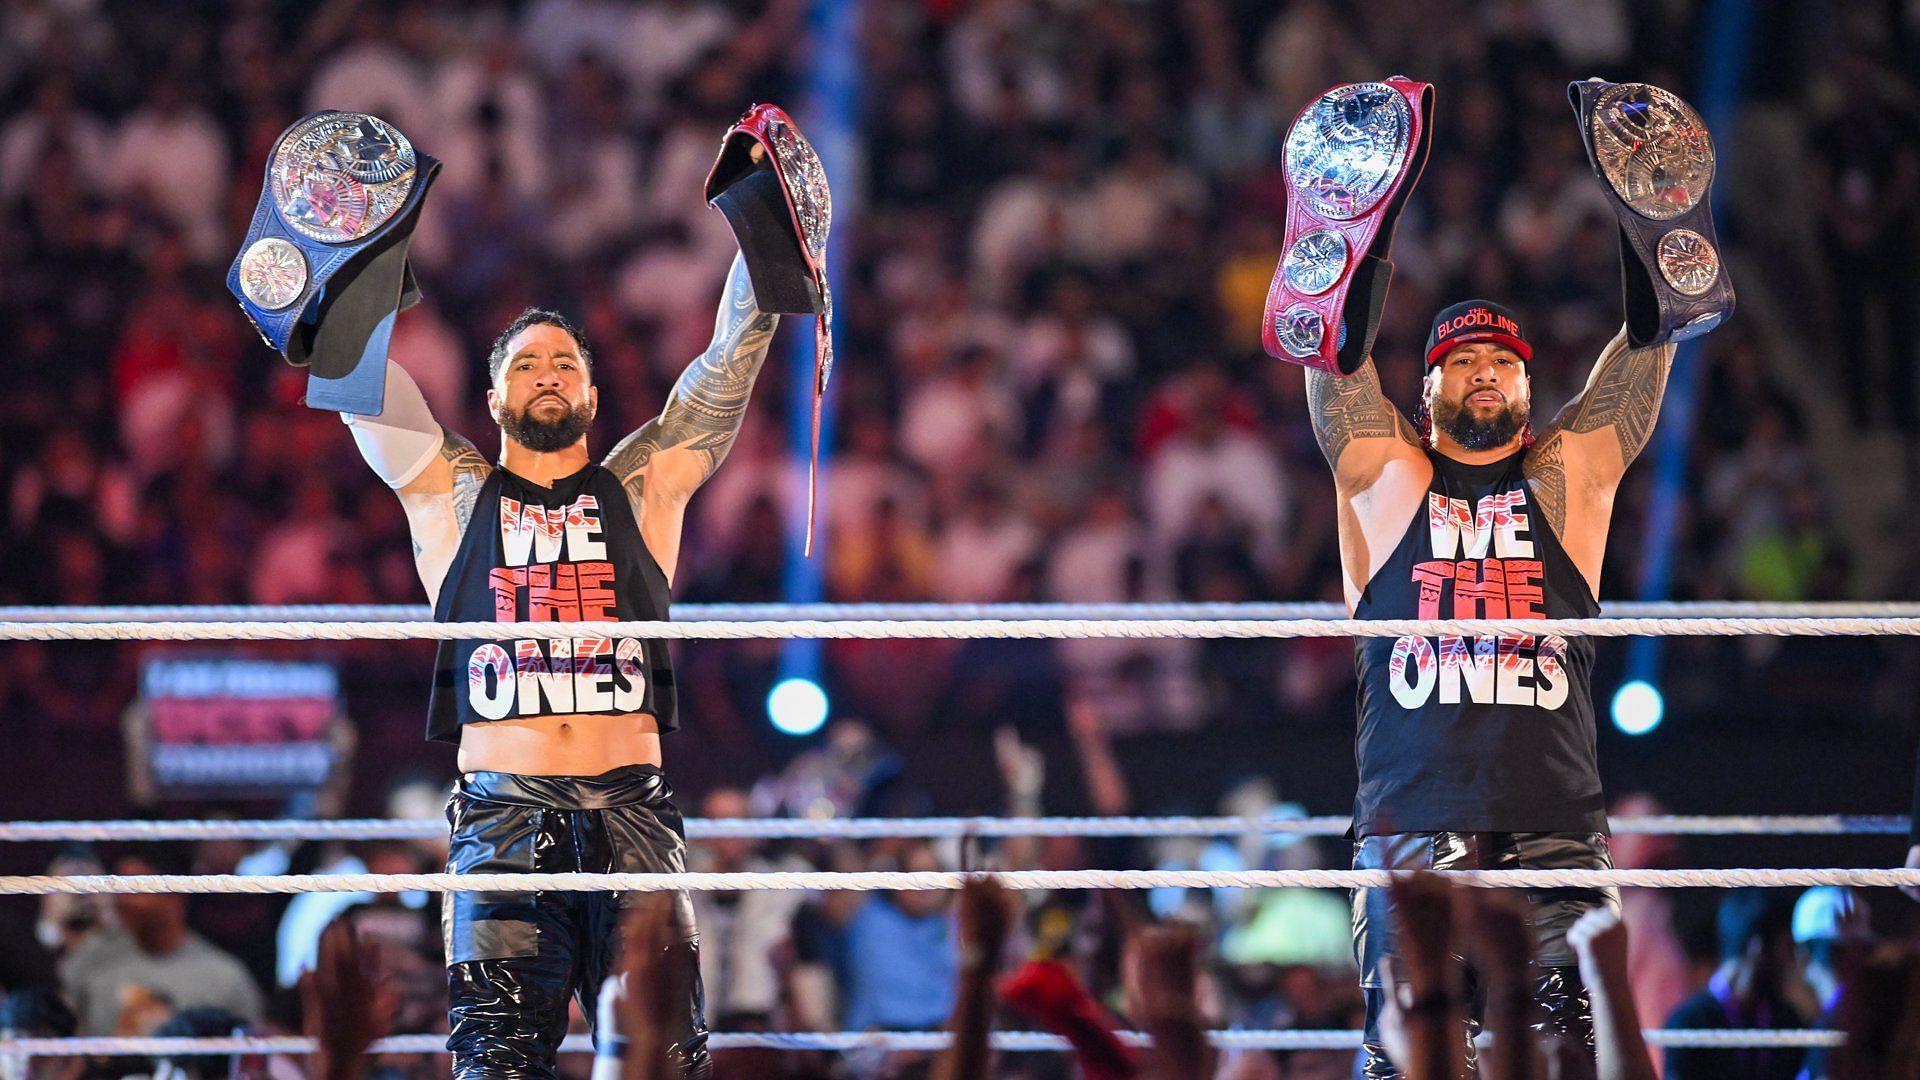 The Usos are the tag team champions